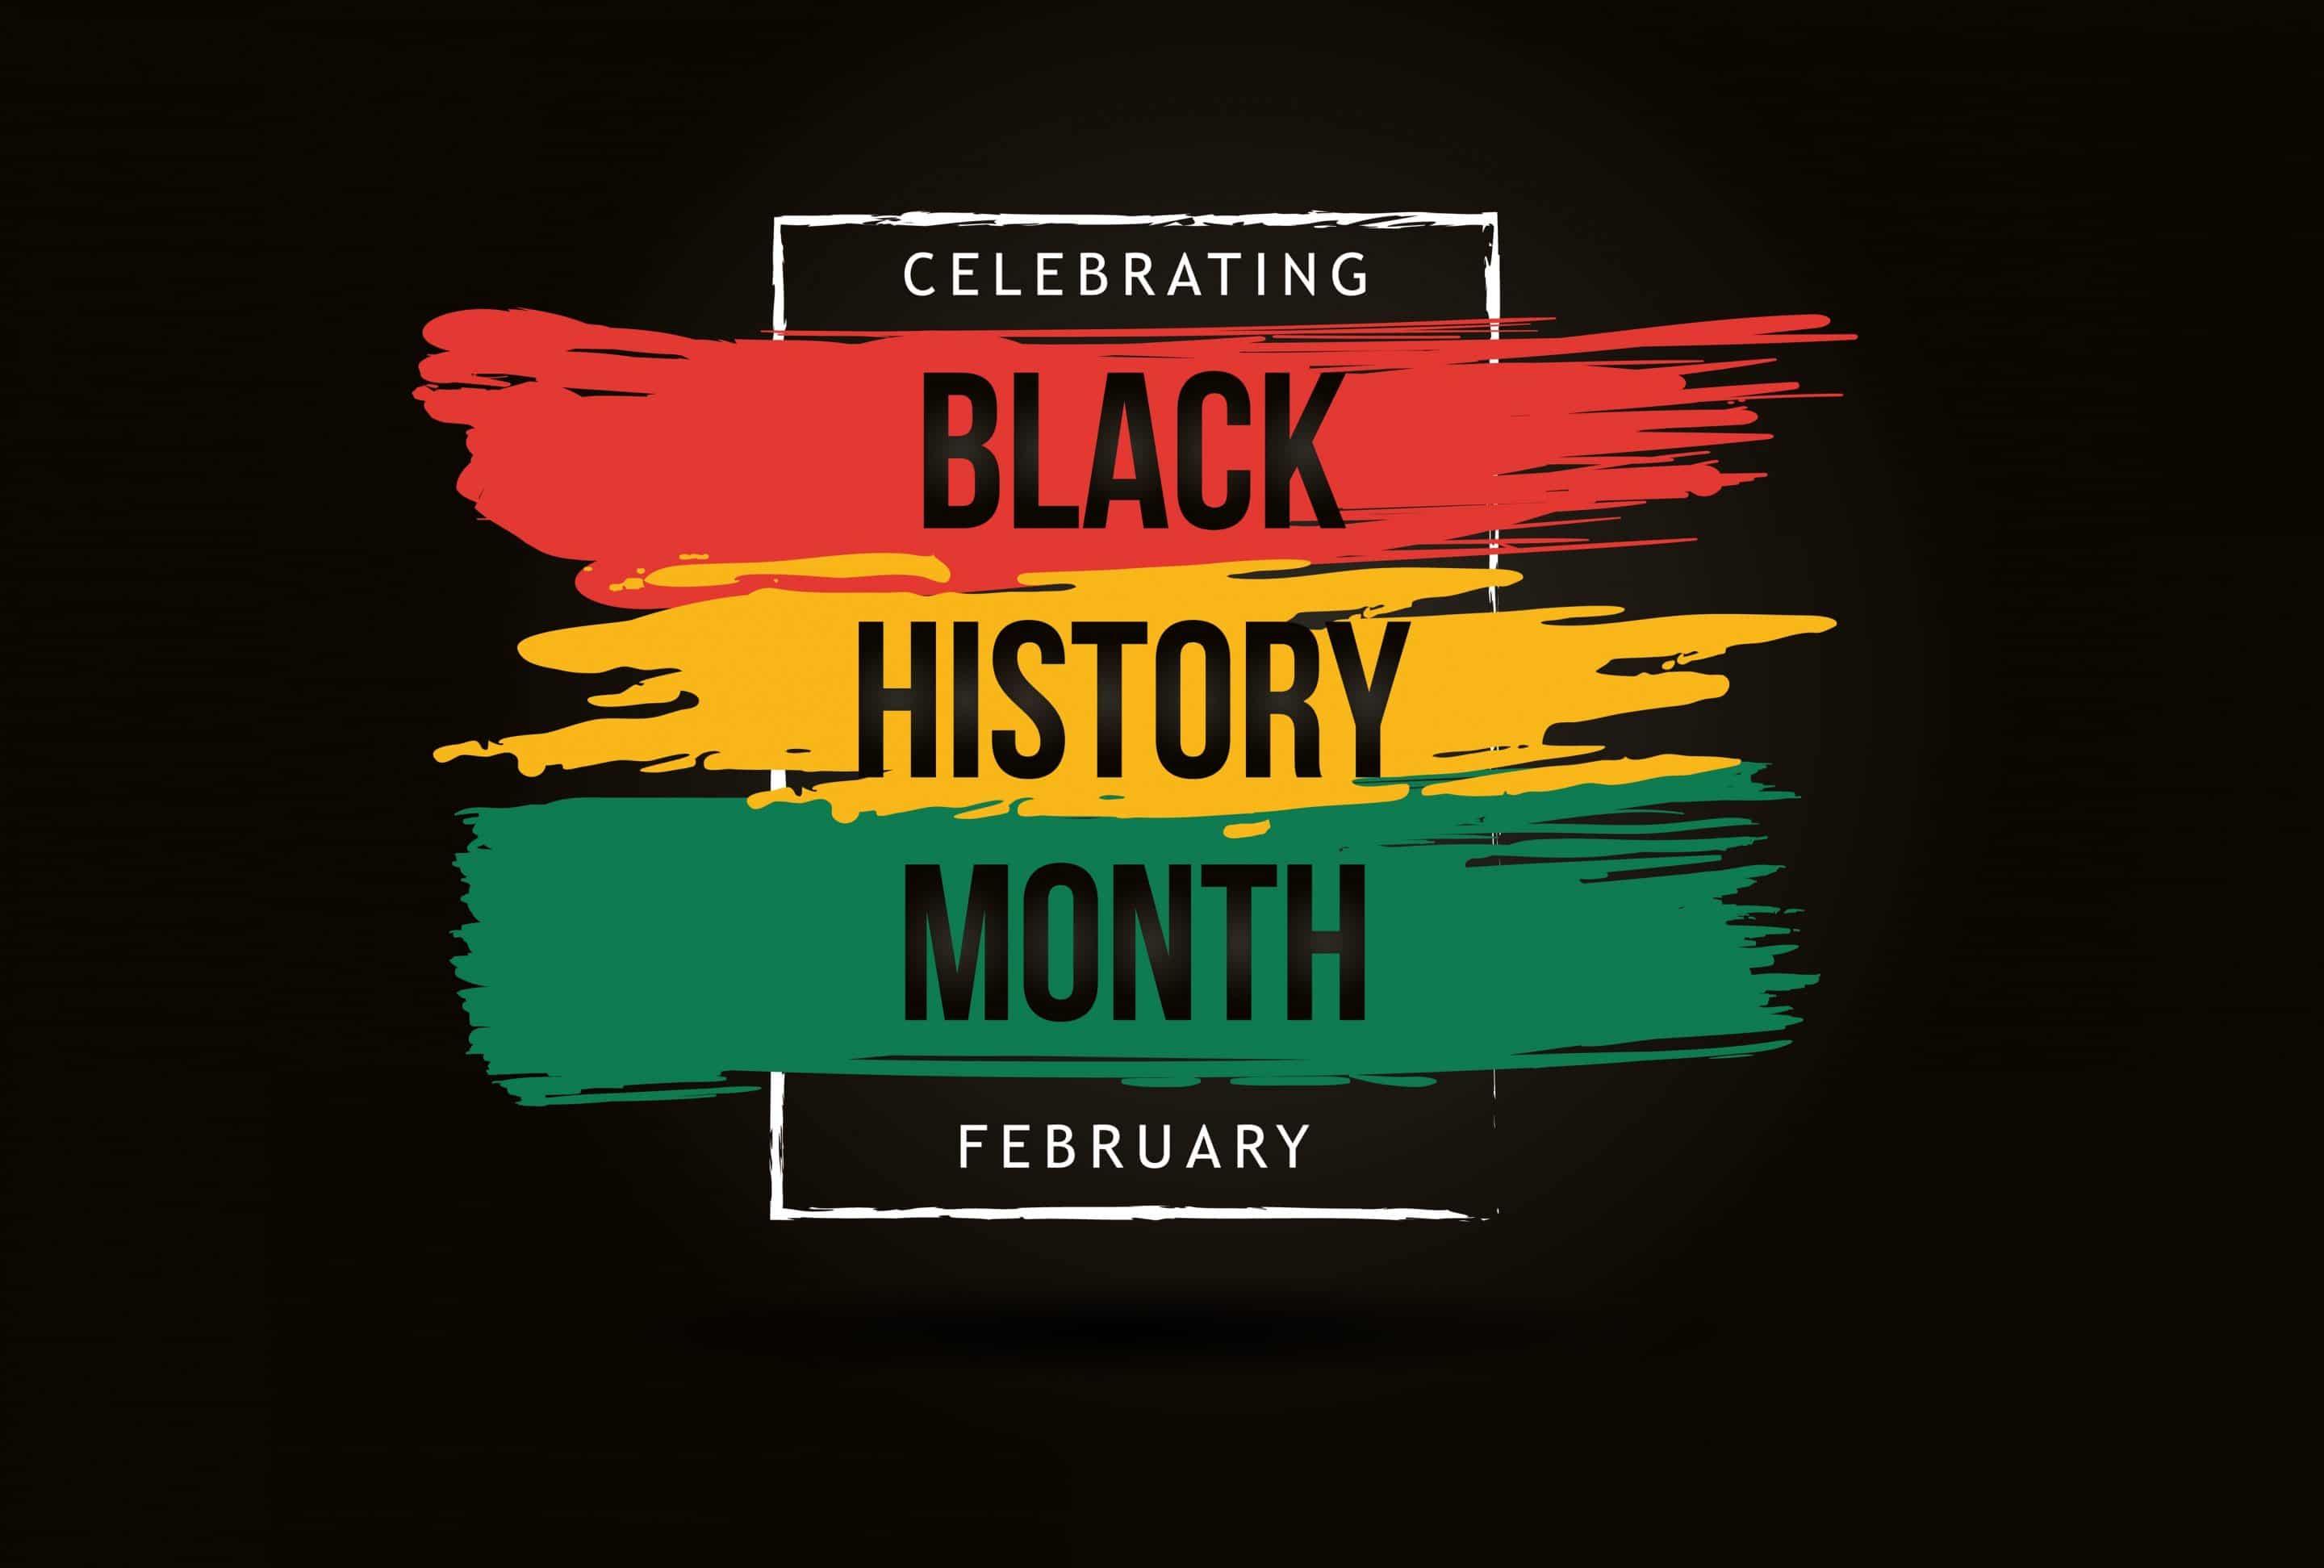 https://www.cameronmch.com/wp-content/uploads/2021/02/black-history-month-scaled.jpg